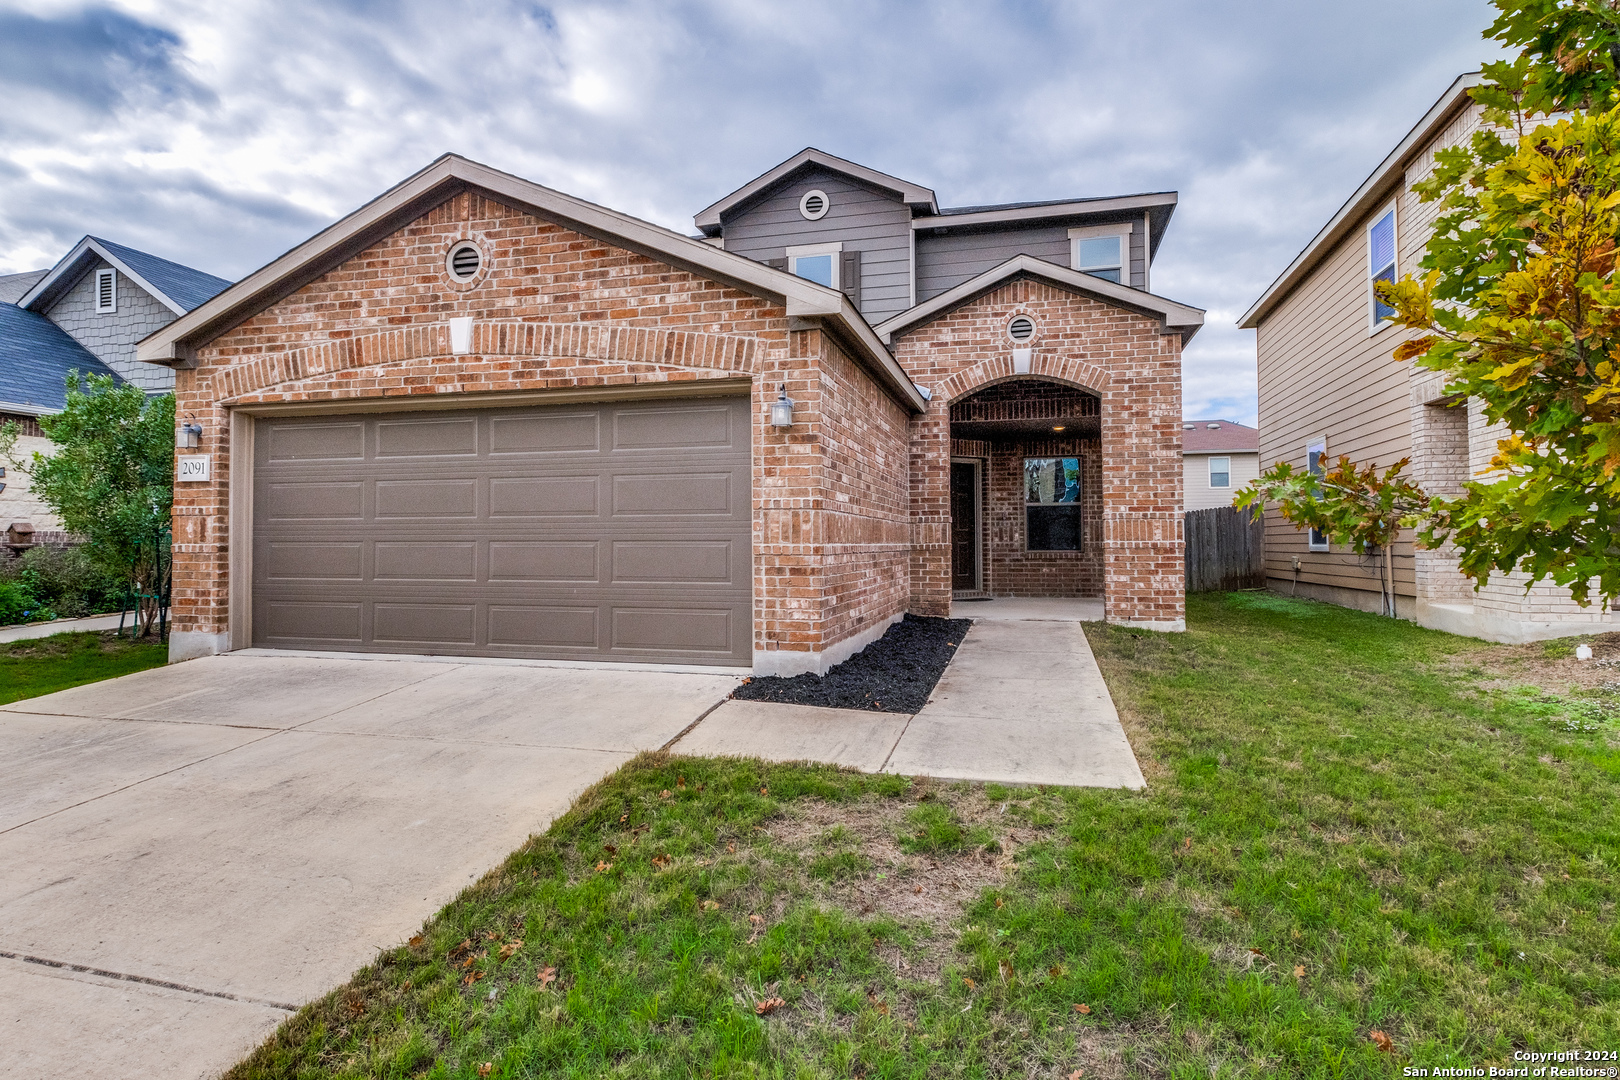 Photo of 2091 Shire Mdws in New Braunfels, TX